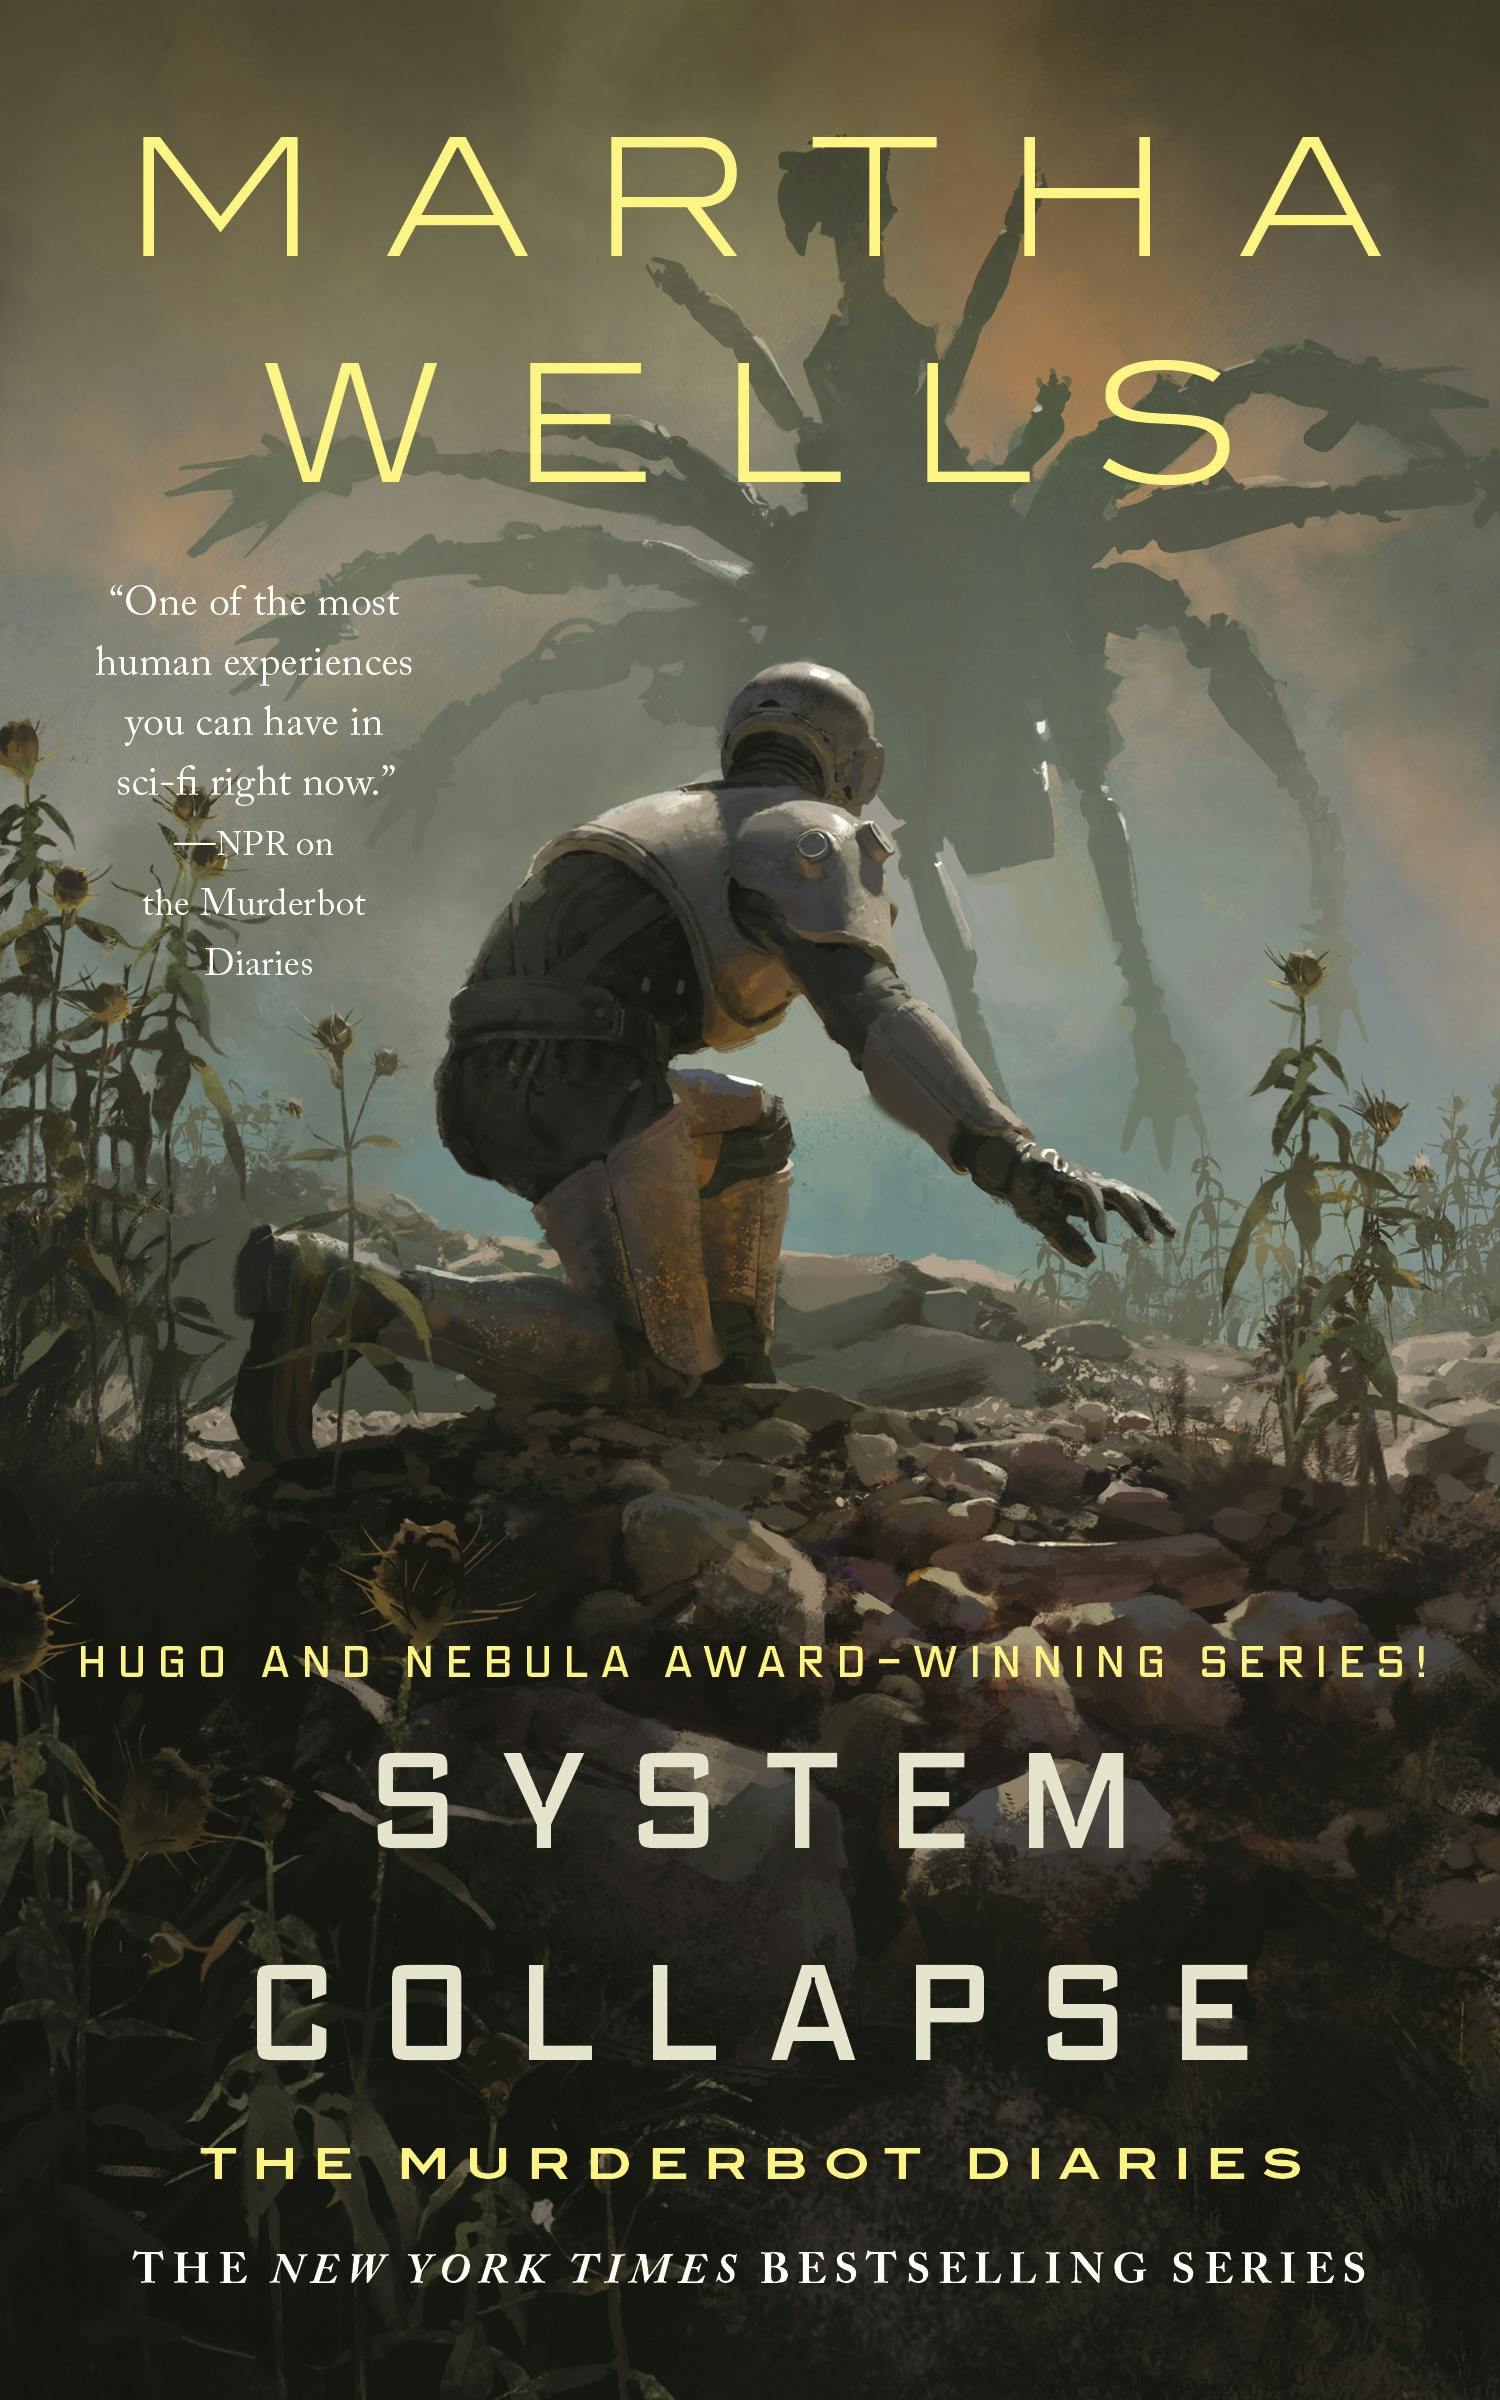 Cover for the book titled as: System Collapse